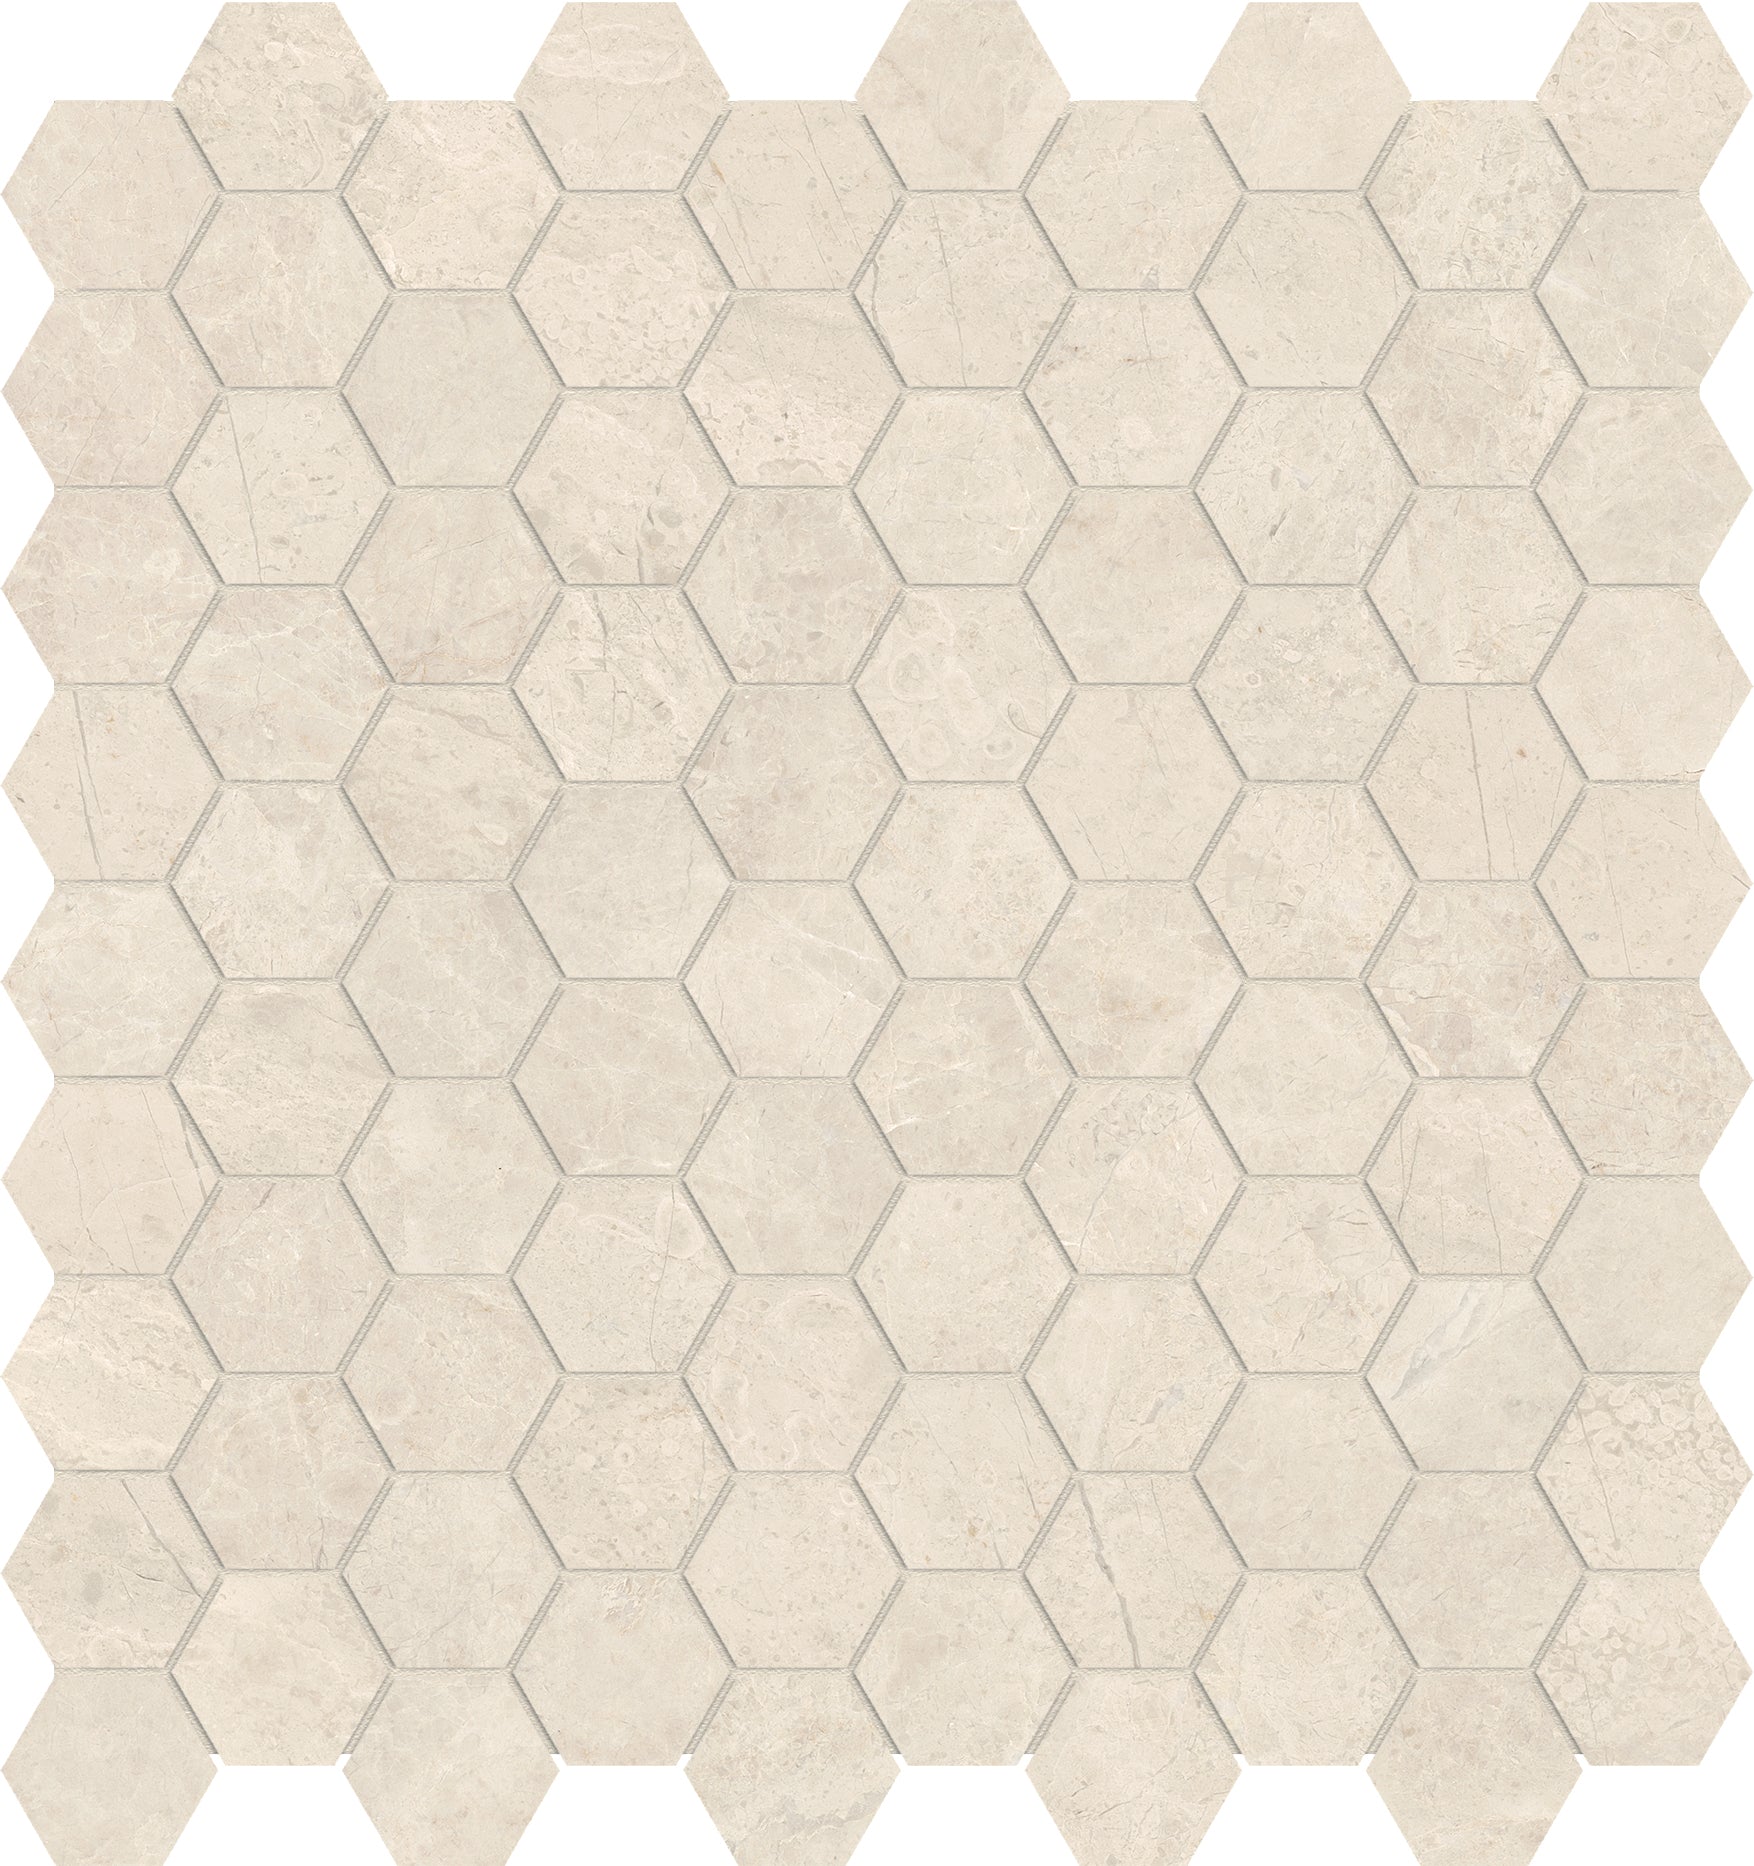 allure ivory hexagon 1&25-inch pattern glazed porcelain mosaic from mayfair anatolia collection distributed by surface group international polished finish straight edge edge mesh shape